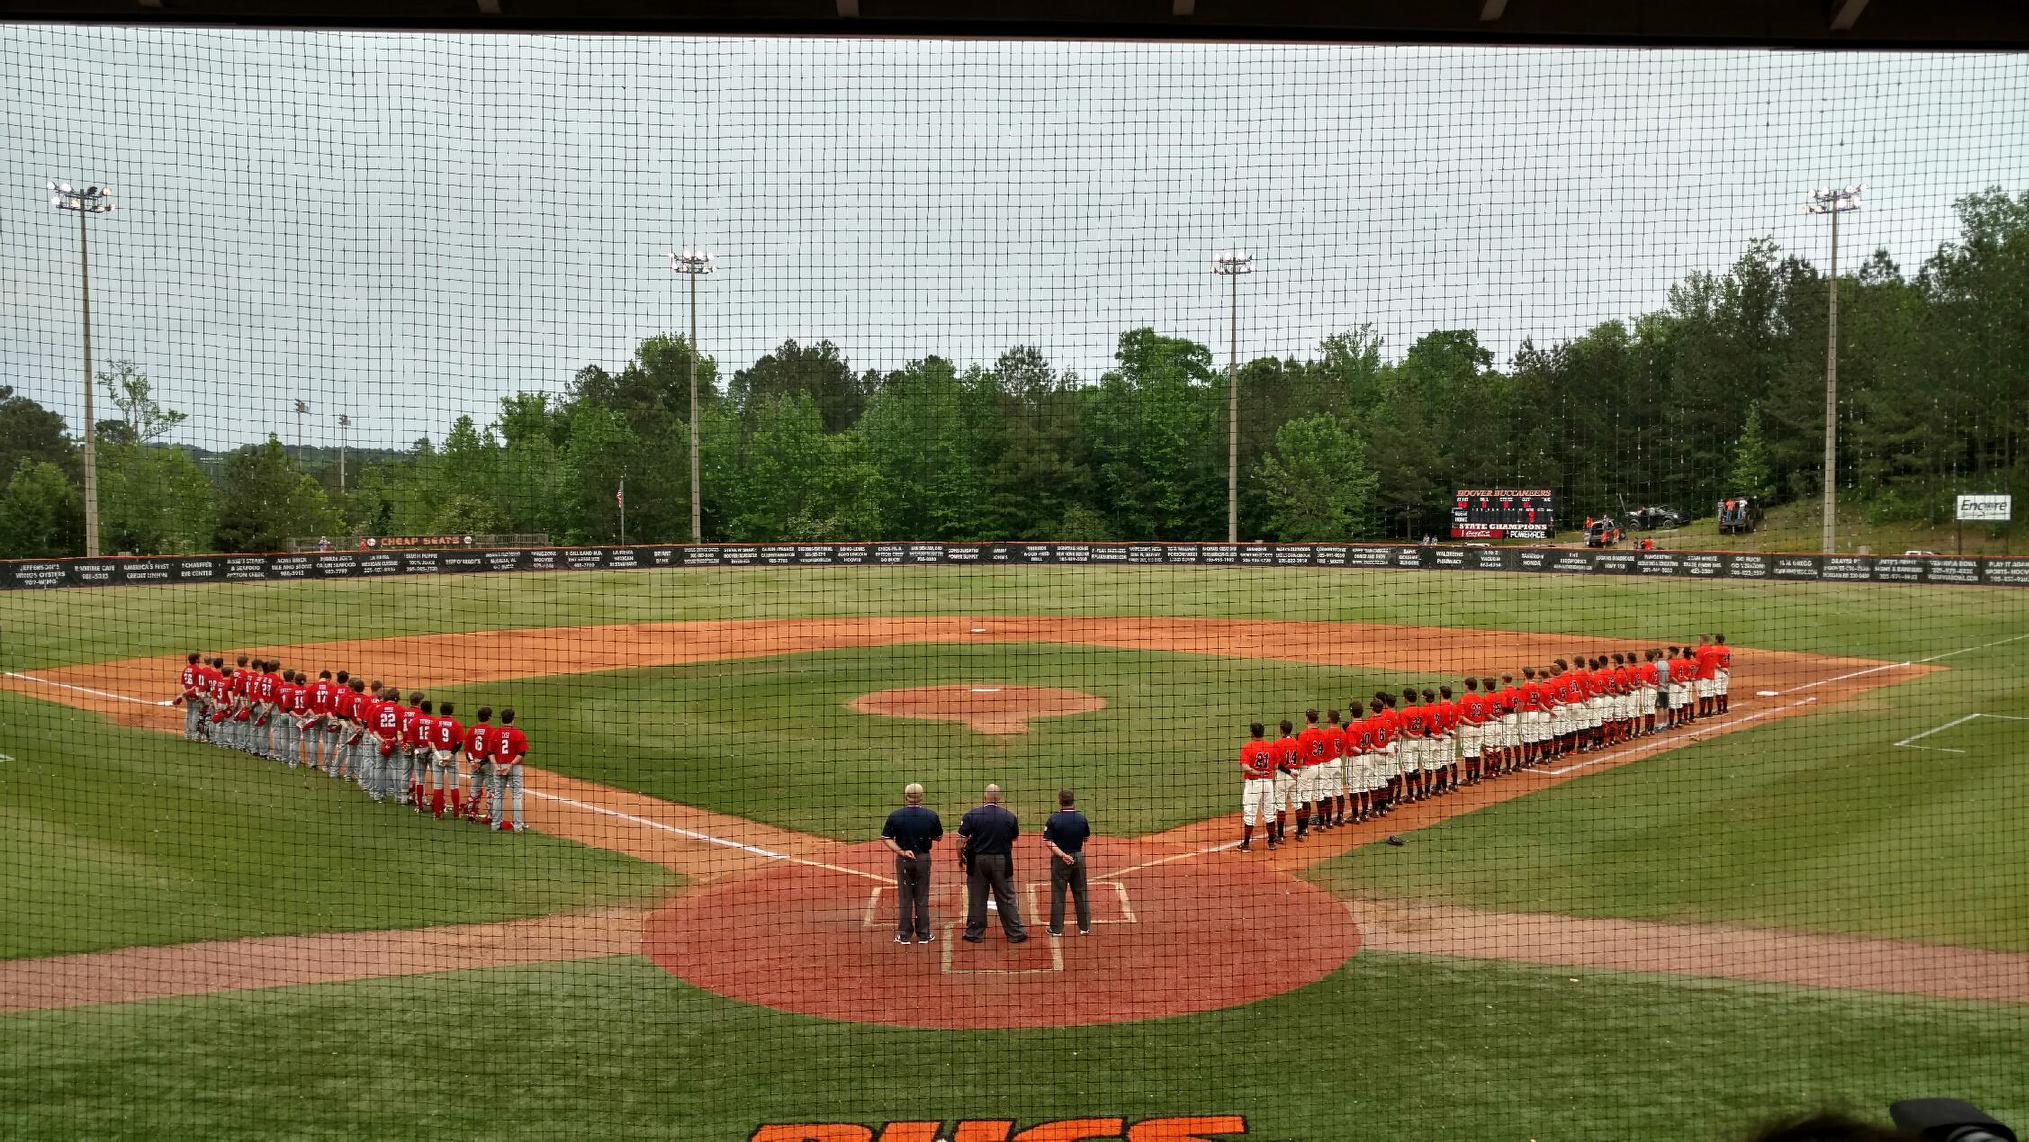 Hewitt-Trussville vs Hoover start time moved up to 12:30 p.m. Saturday